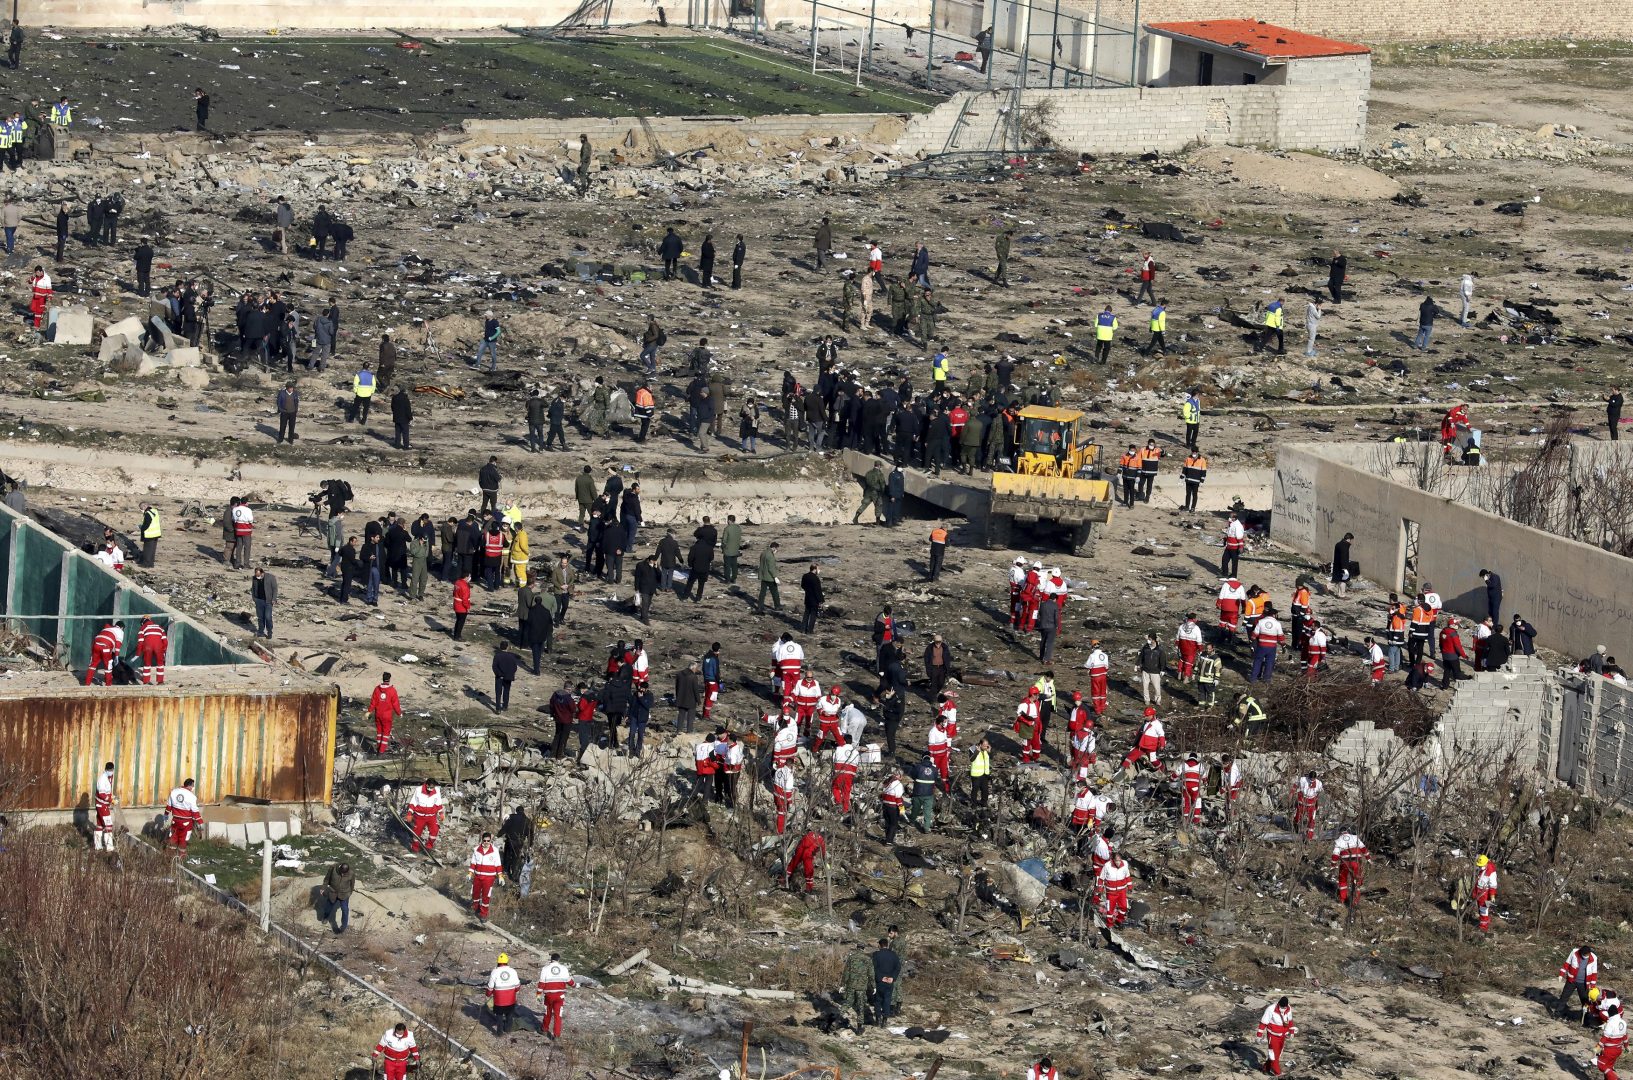 Rescue workers search the scene where an Ukrainian plane crashed in Shahedshahr, southwest of the capital Tehran, Iran, Wednesday, Jan. 8, 2020. A Ukrainian passenger jet carrying 176 people crashed on Wednesday, just minutes after taking off from the Iranian capital's main airport, turning farmland on the outskirts of Tehran into fields of flaming debris and killing all on board. 